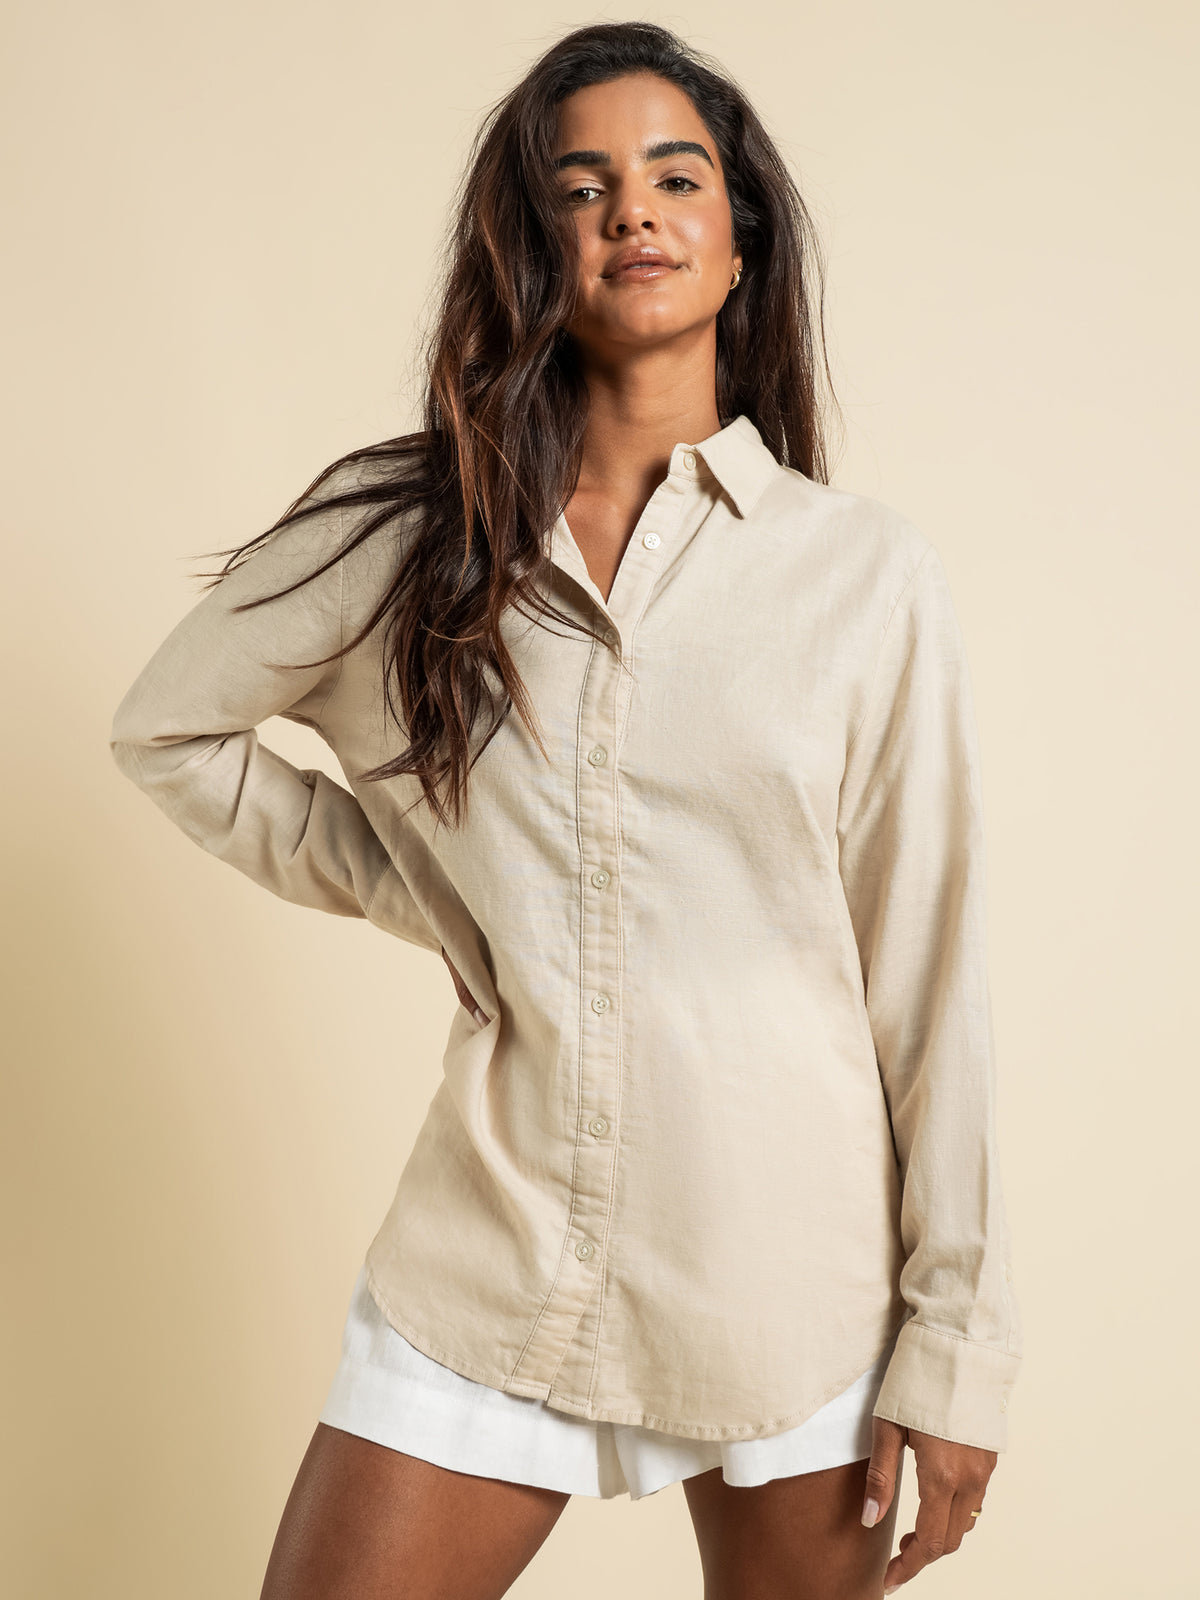 Classic Long Sleeve Shirt in Sand